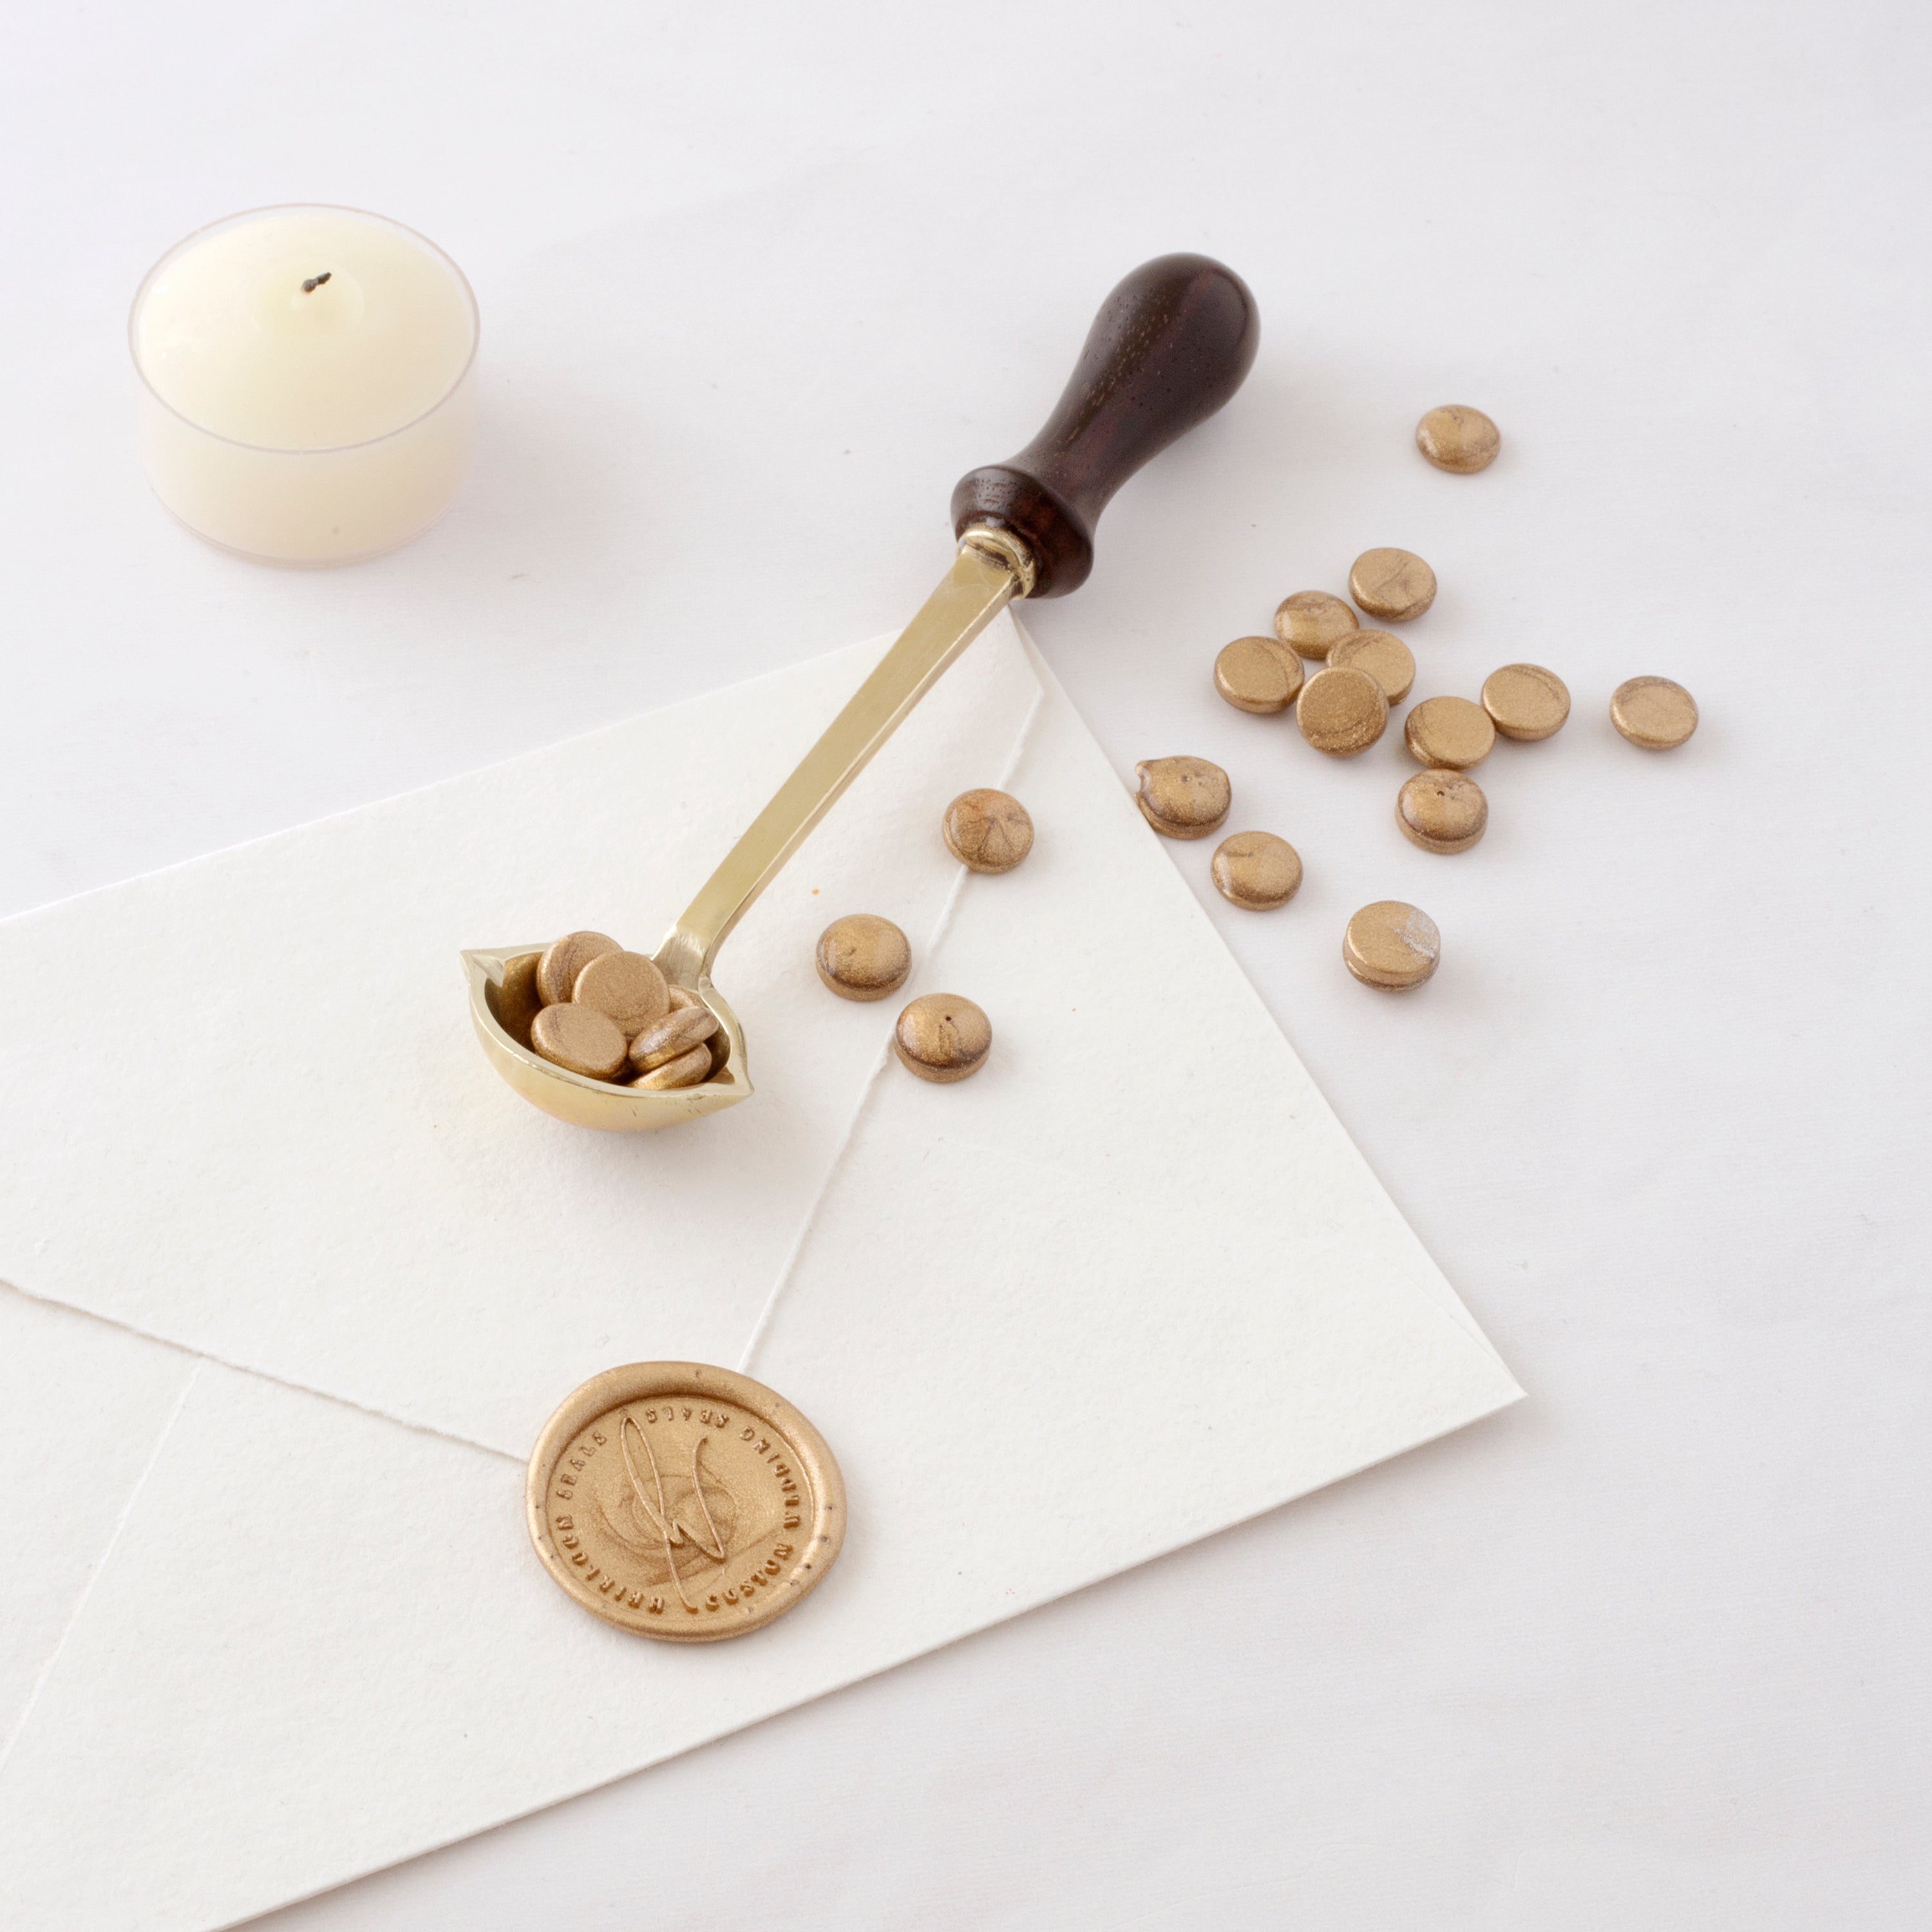 Custom Wax Seal Made From Sealing Wax Beads | Different Types Of Sealing Wax | Heirloom Seals